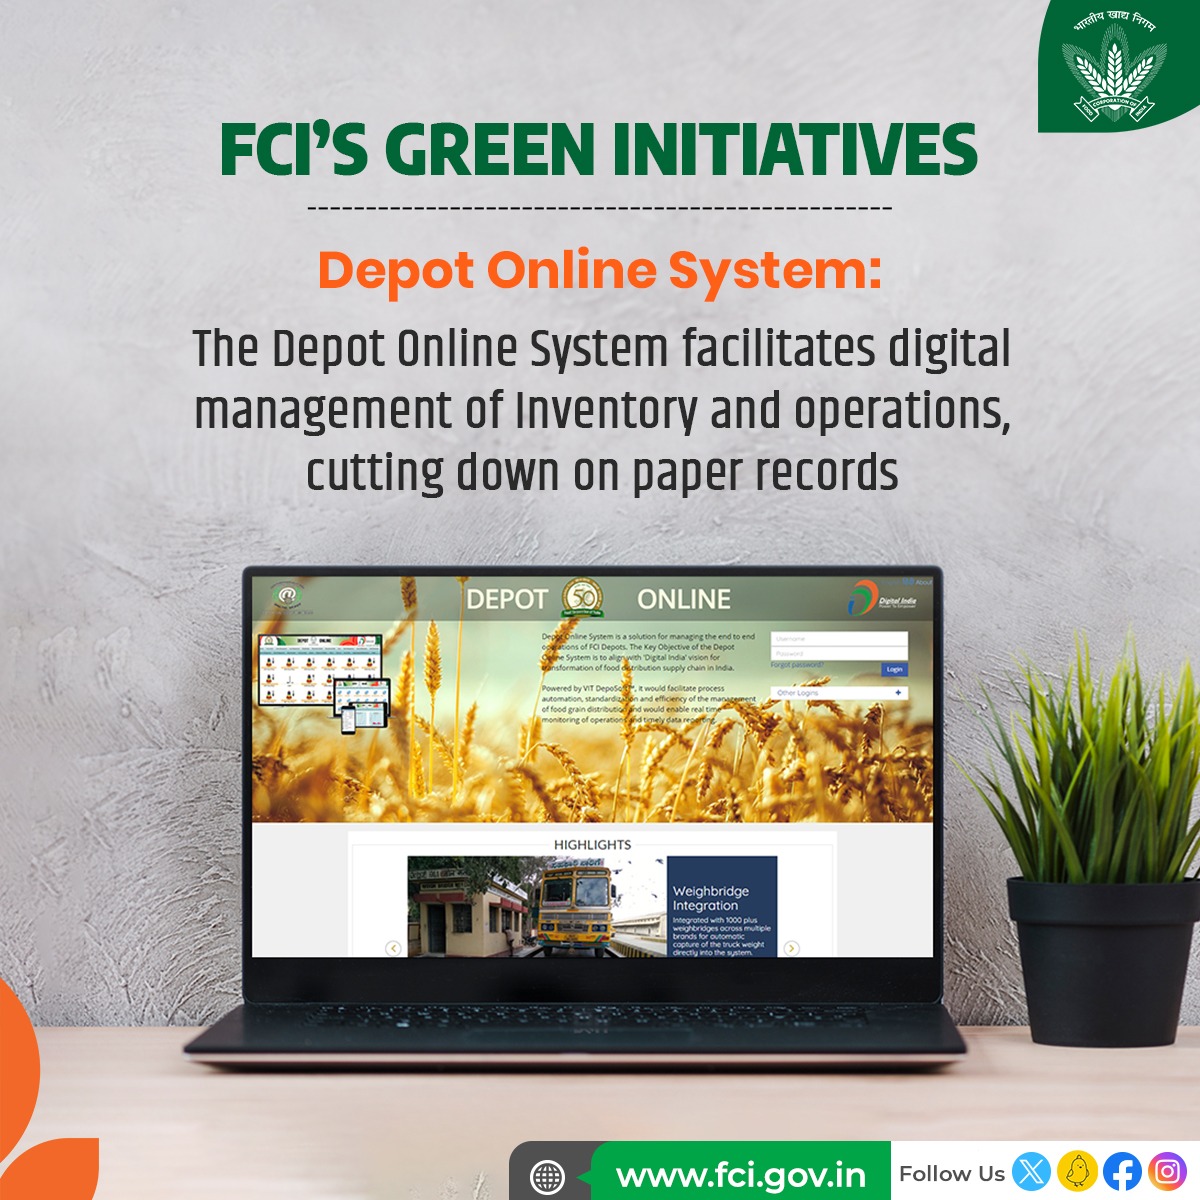 The Depot Online System is part of FCI's numerous green initiatives aimed at creating an eco-friendly workflow. This digital platform streamlines inventory management and operations, eliminating the need for paper records. #DigitalIndia